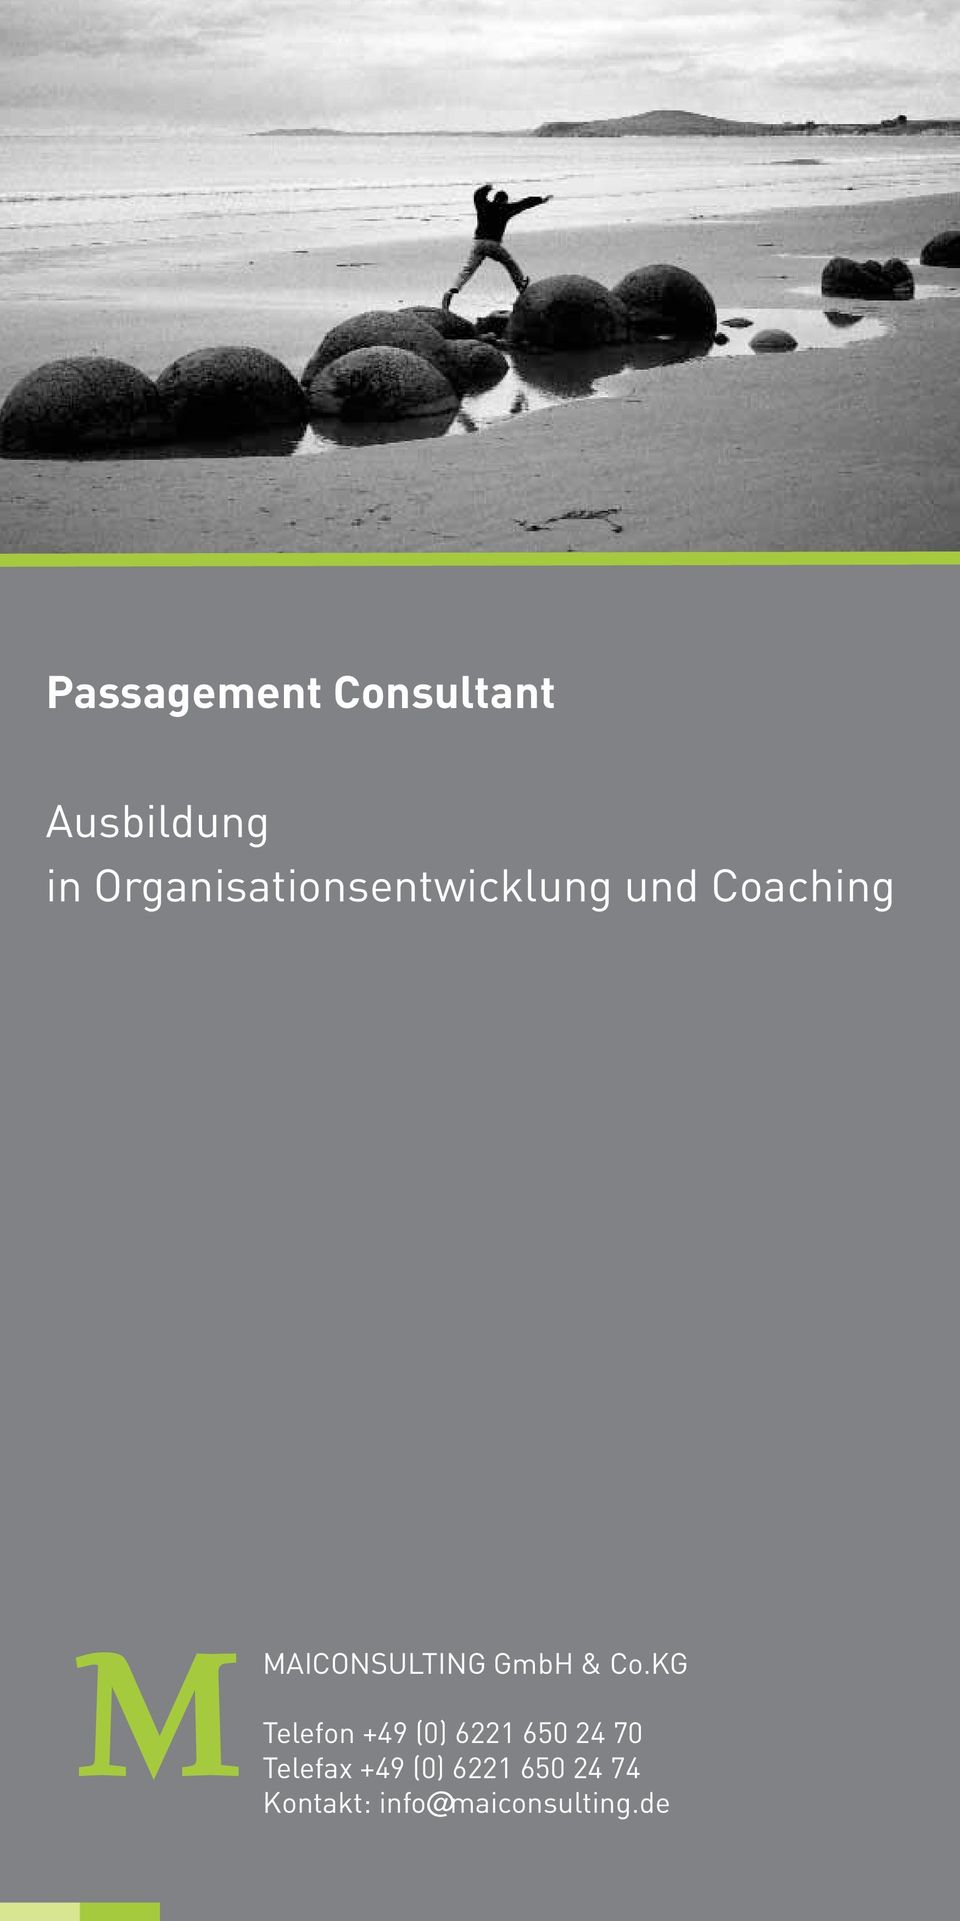 MAICONSULTING GmbH & Co.